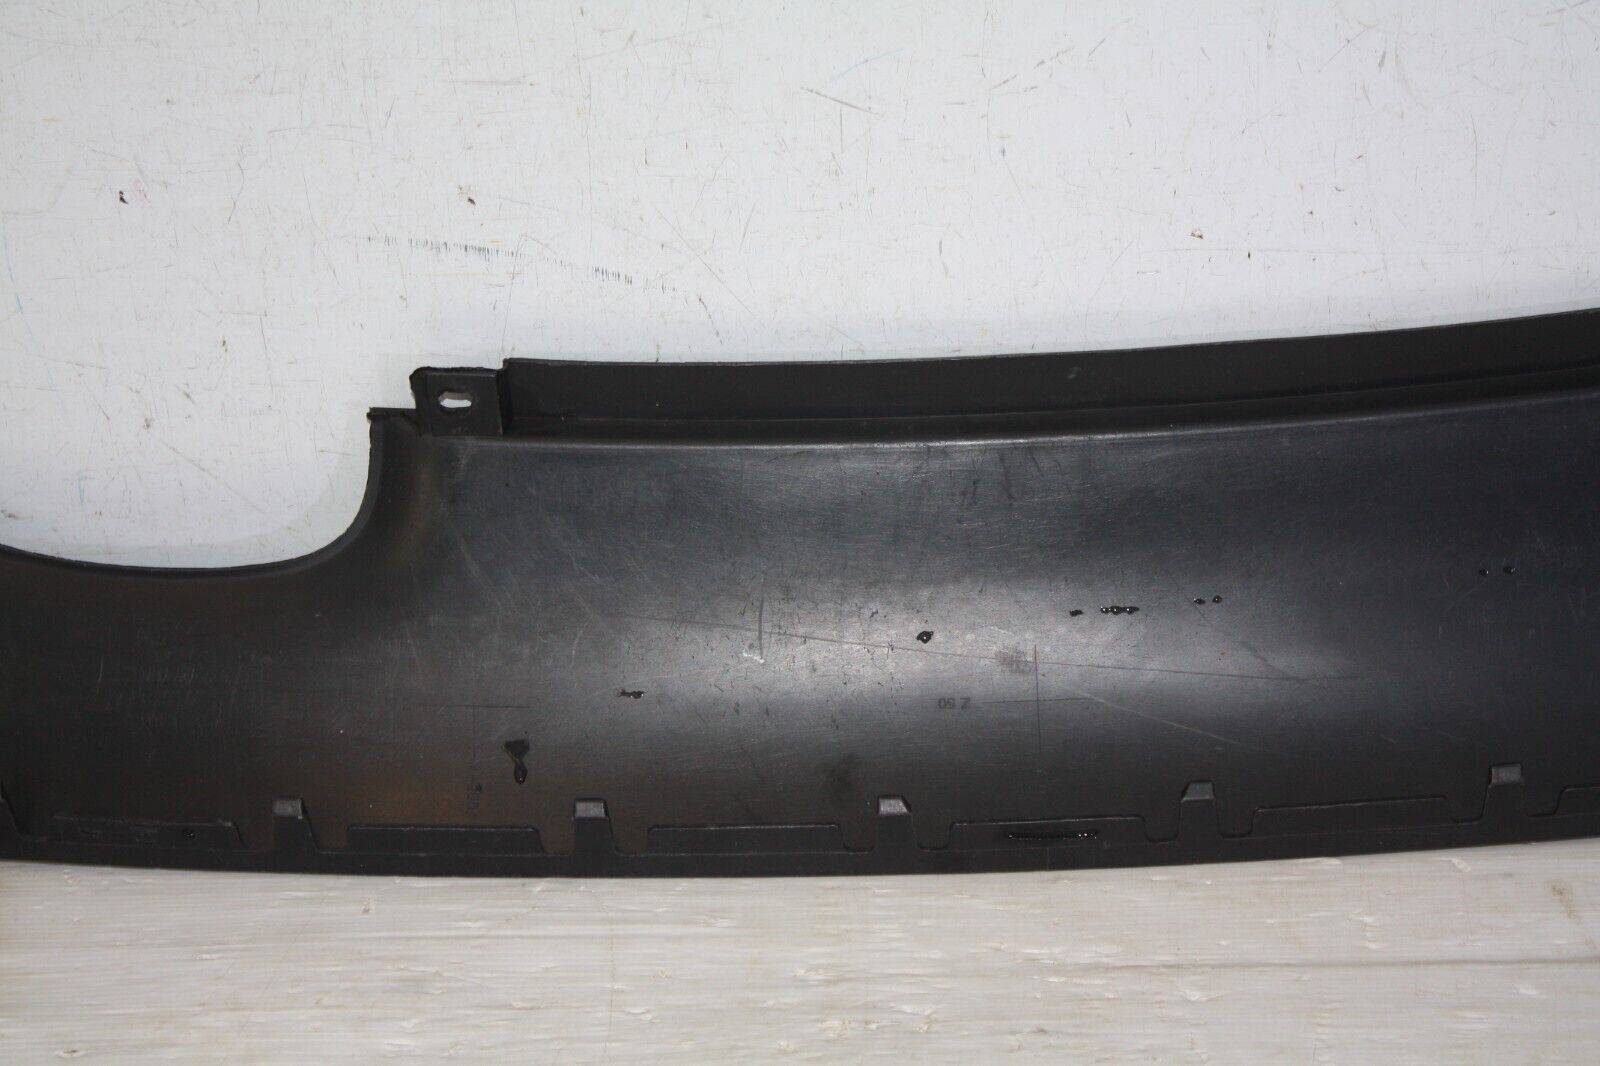 VW-Polo-Rear-Bumper-Lower-Section-2002-To-2005-6Q6807521-Genuine-176093468813-14